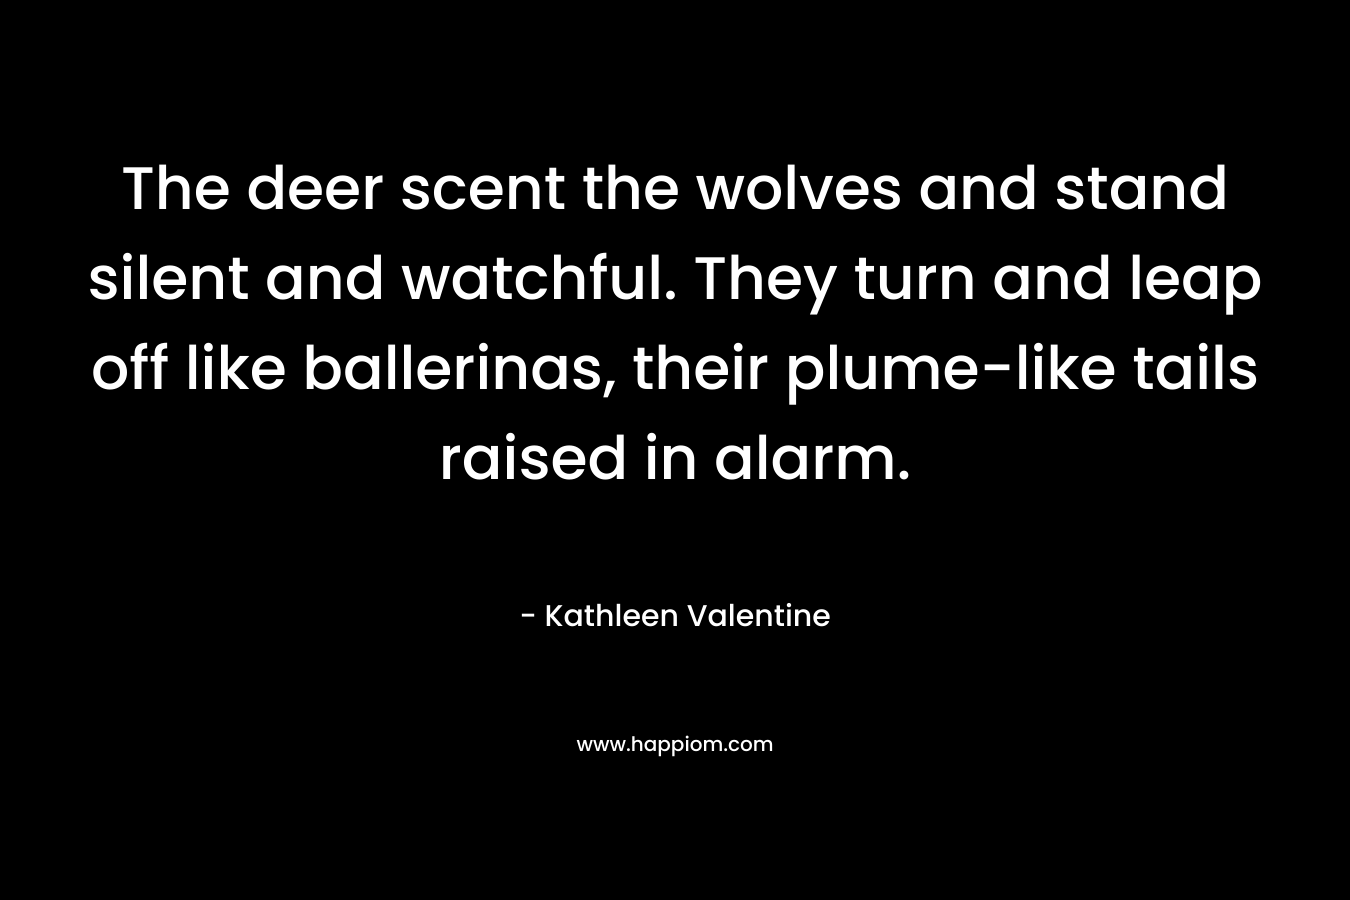 The deer scent the wolves and stand silent and watchful. They turn and leap off like ballerinas, their plume-like tails raised in alarm.